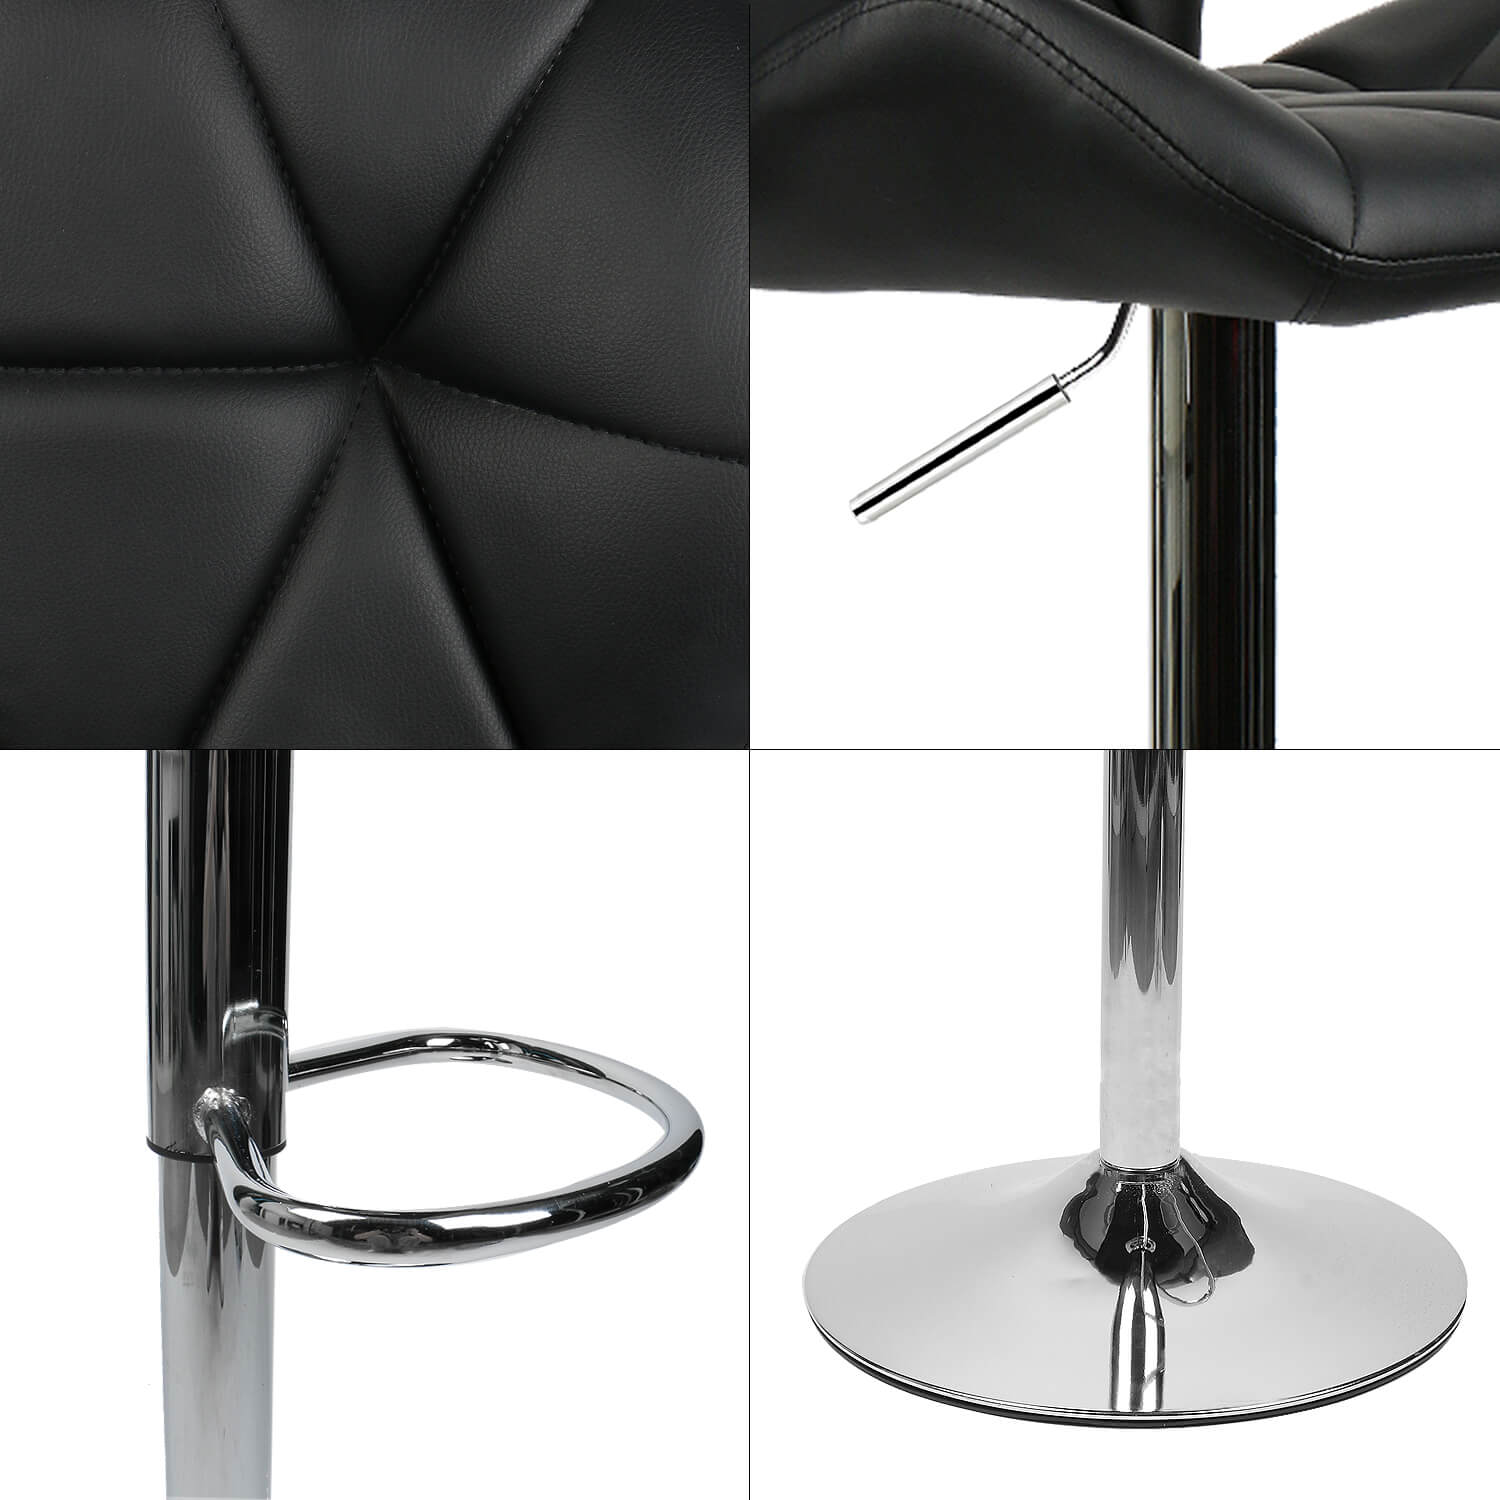 Feature details of Elecwish black bar stools